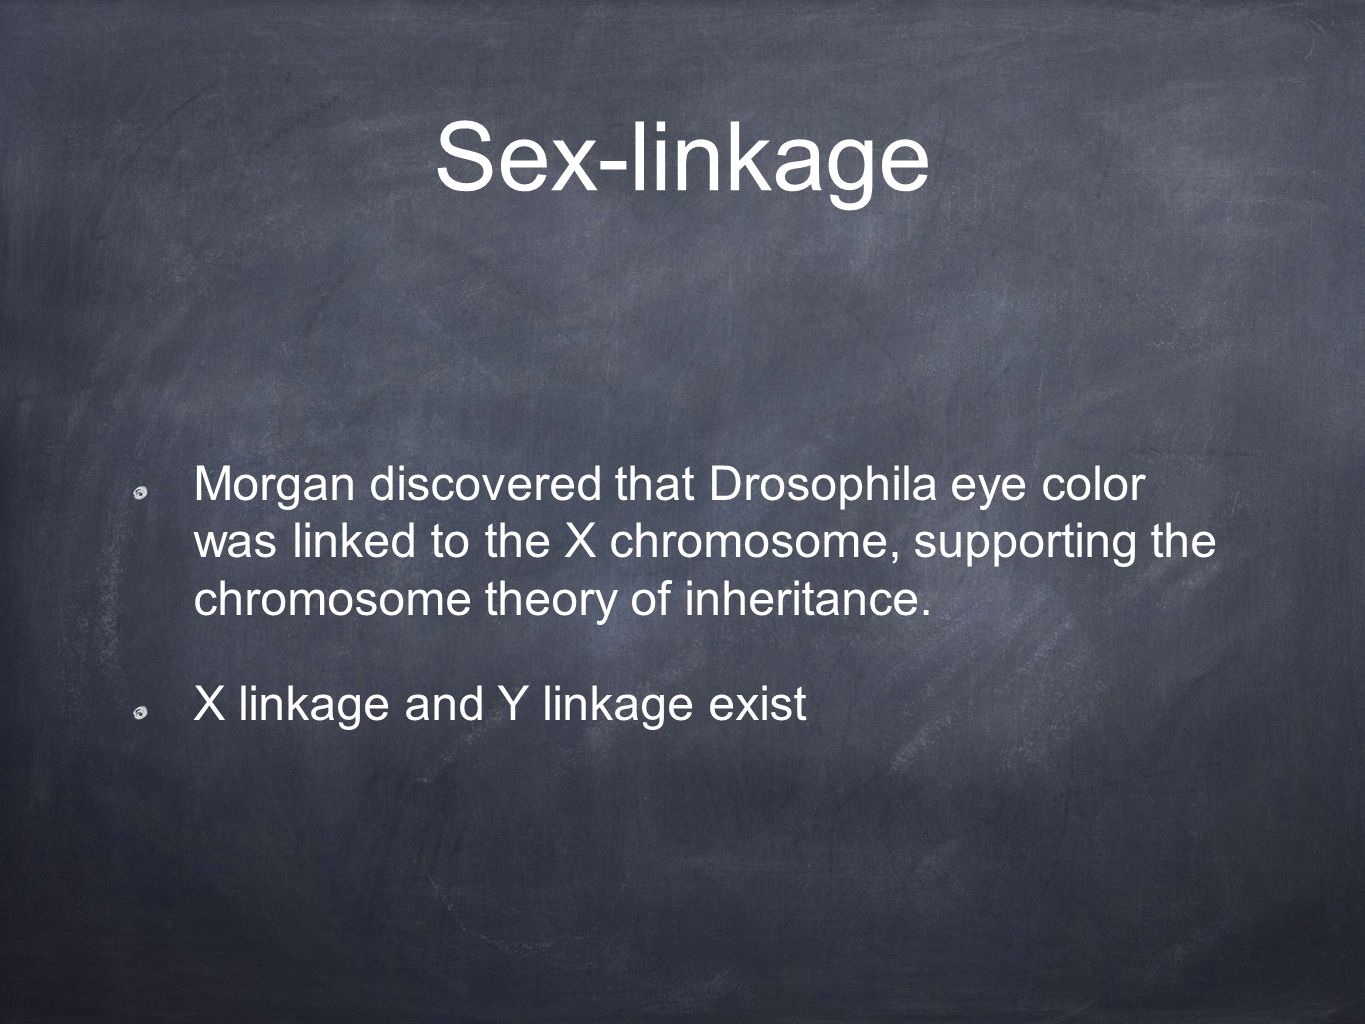 Sex-linkage Morgan discovered that Drosophila eye color was linked to the X chromosome, supporting the chromosome theory of inheritance.